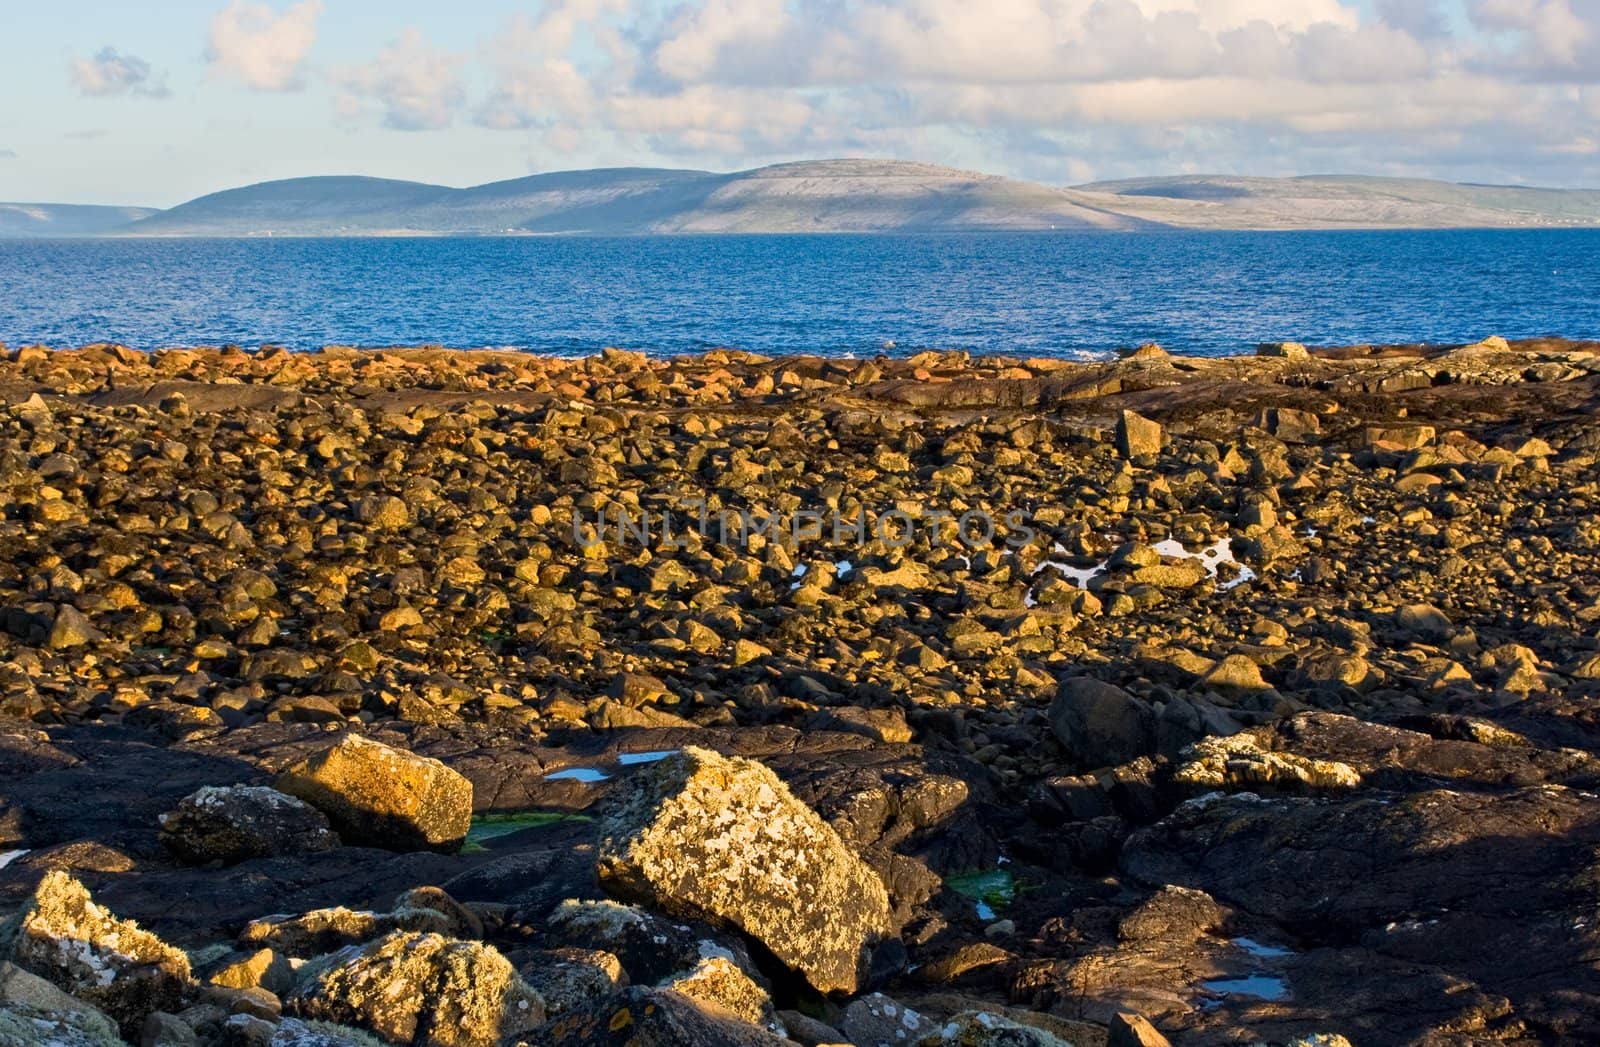 Galway Bay in Ireland with The Burren across the bay. Photo is layered from front to back with Rocks, Galway Bay, The Burren, and sky.